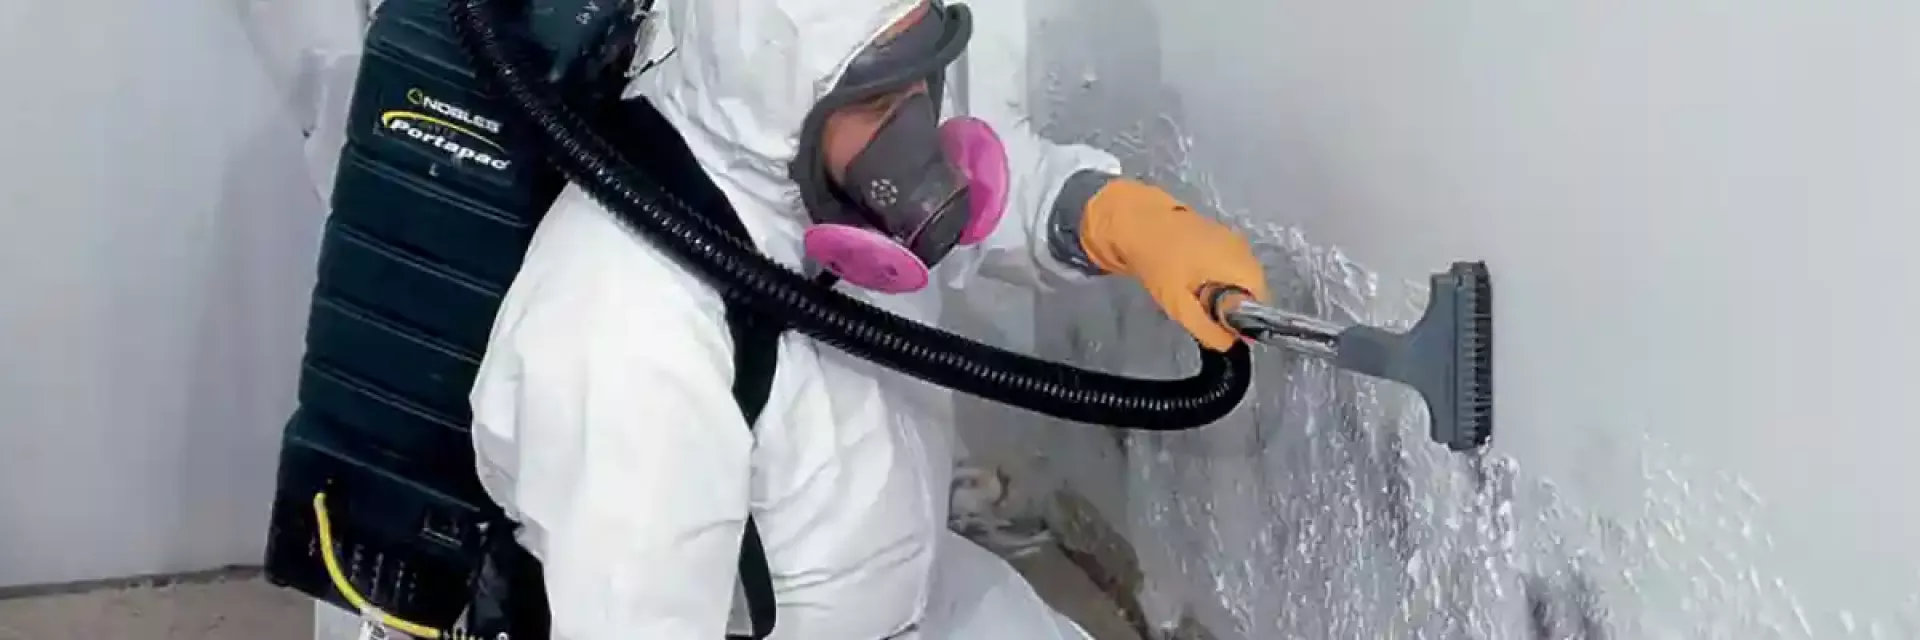 BELFOR technician vacuums mold from wall